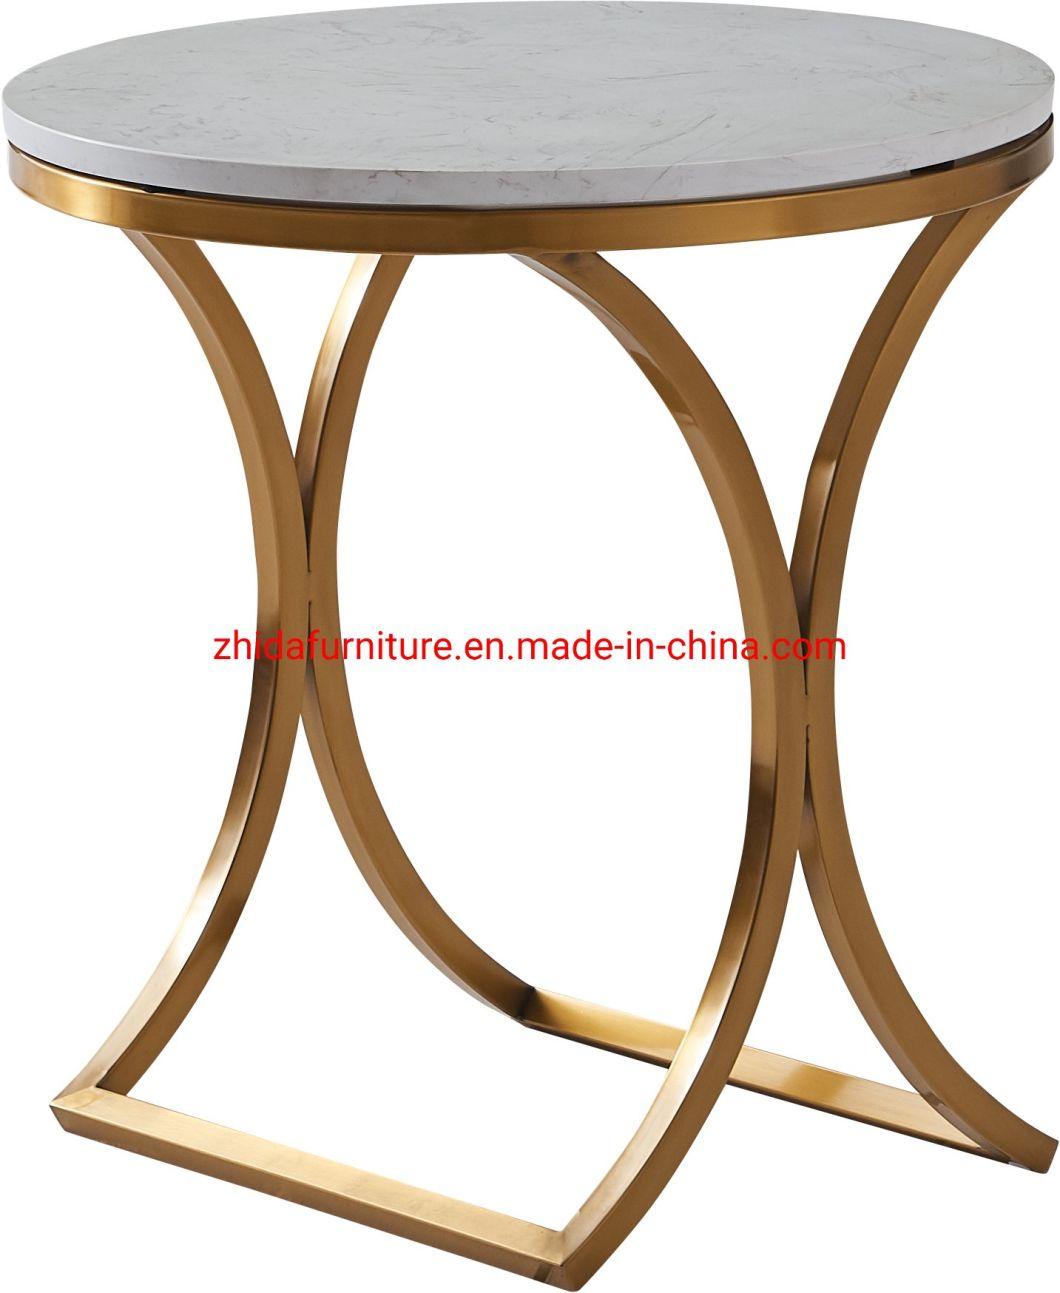 Home Furniture Living Room Luxury Style Bedroom Bedside Table Golden Stainless Steel Metal Frame Marble Top Coffee Side Table